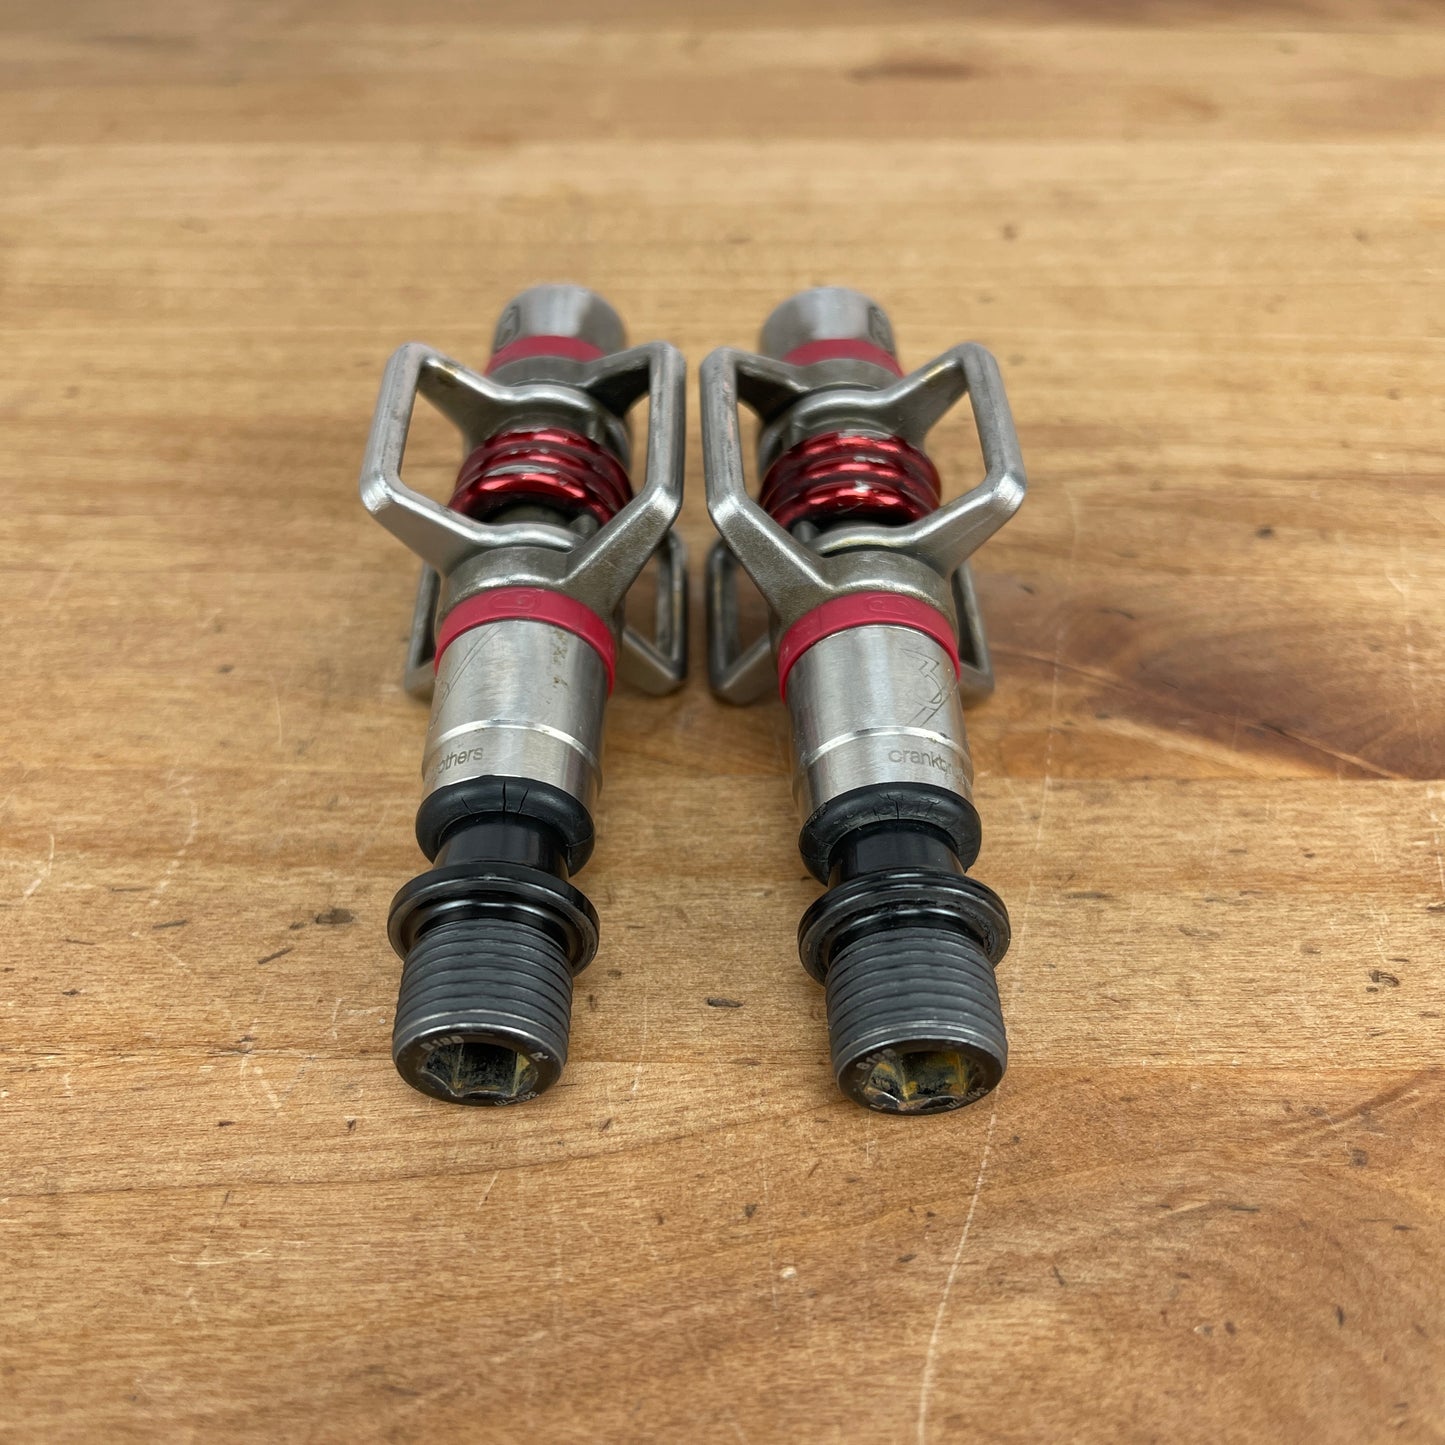 Crankbrothers Eggbeater 3 Clipless MTB Mountain Bike Pedals 280g